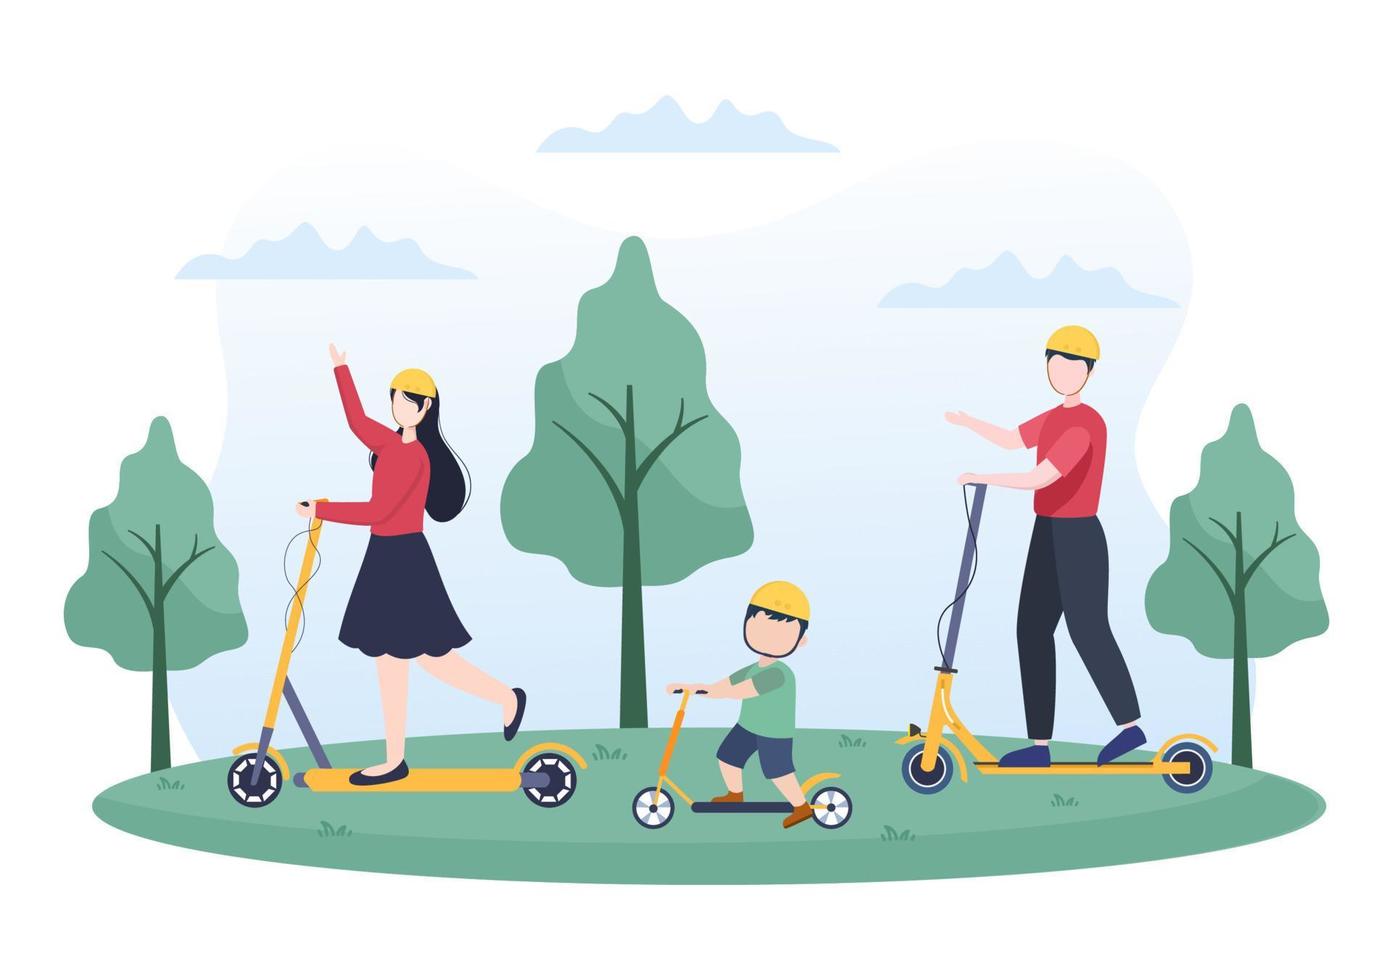 Family Time of Joyful Parents and Children Spending Time Together at Park Doing Various Relaxing Activities in Cartoon Flat Illustration for Poster or Background vector